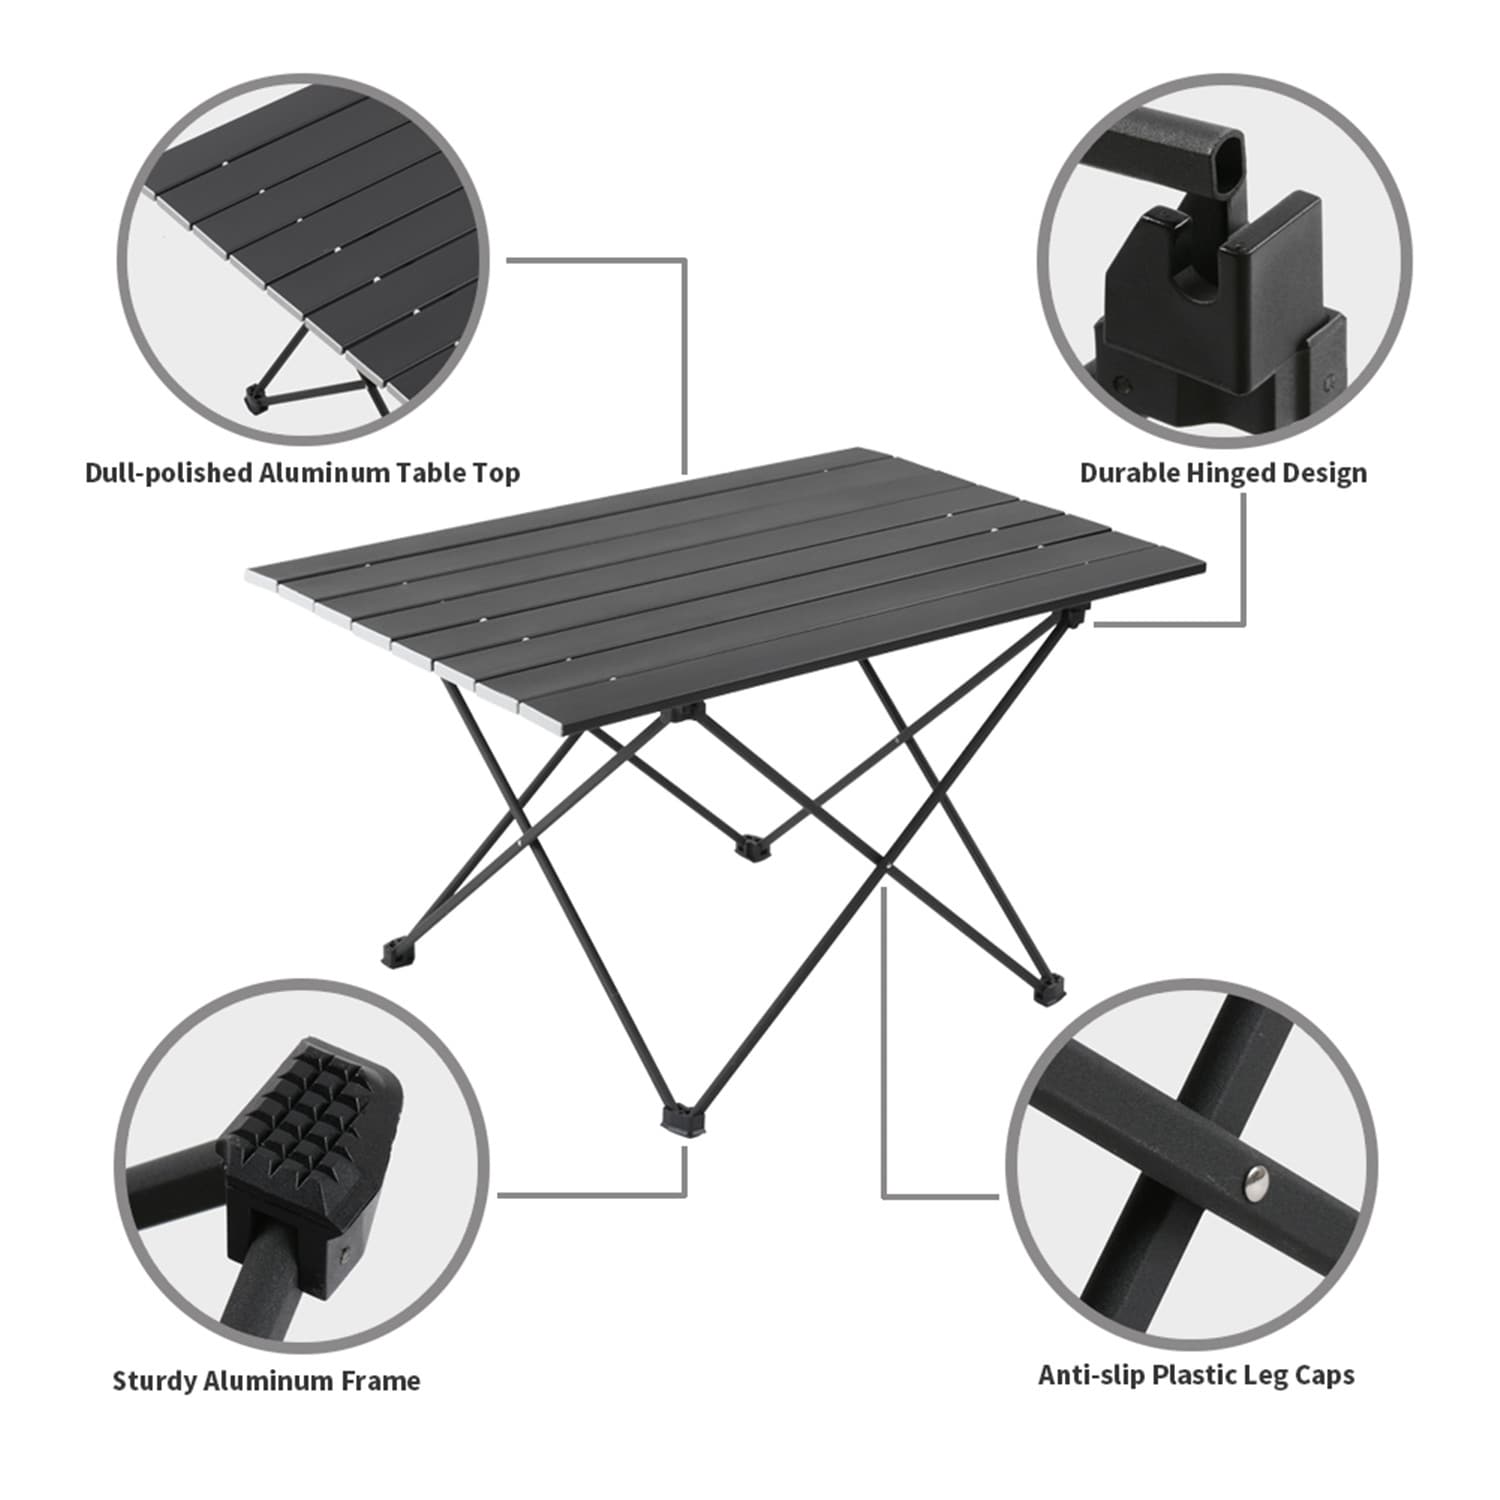 2FT x 1.5FT Outdoor Portable Aluminum Camping Picnic Table Folding Dining BBQ 